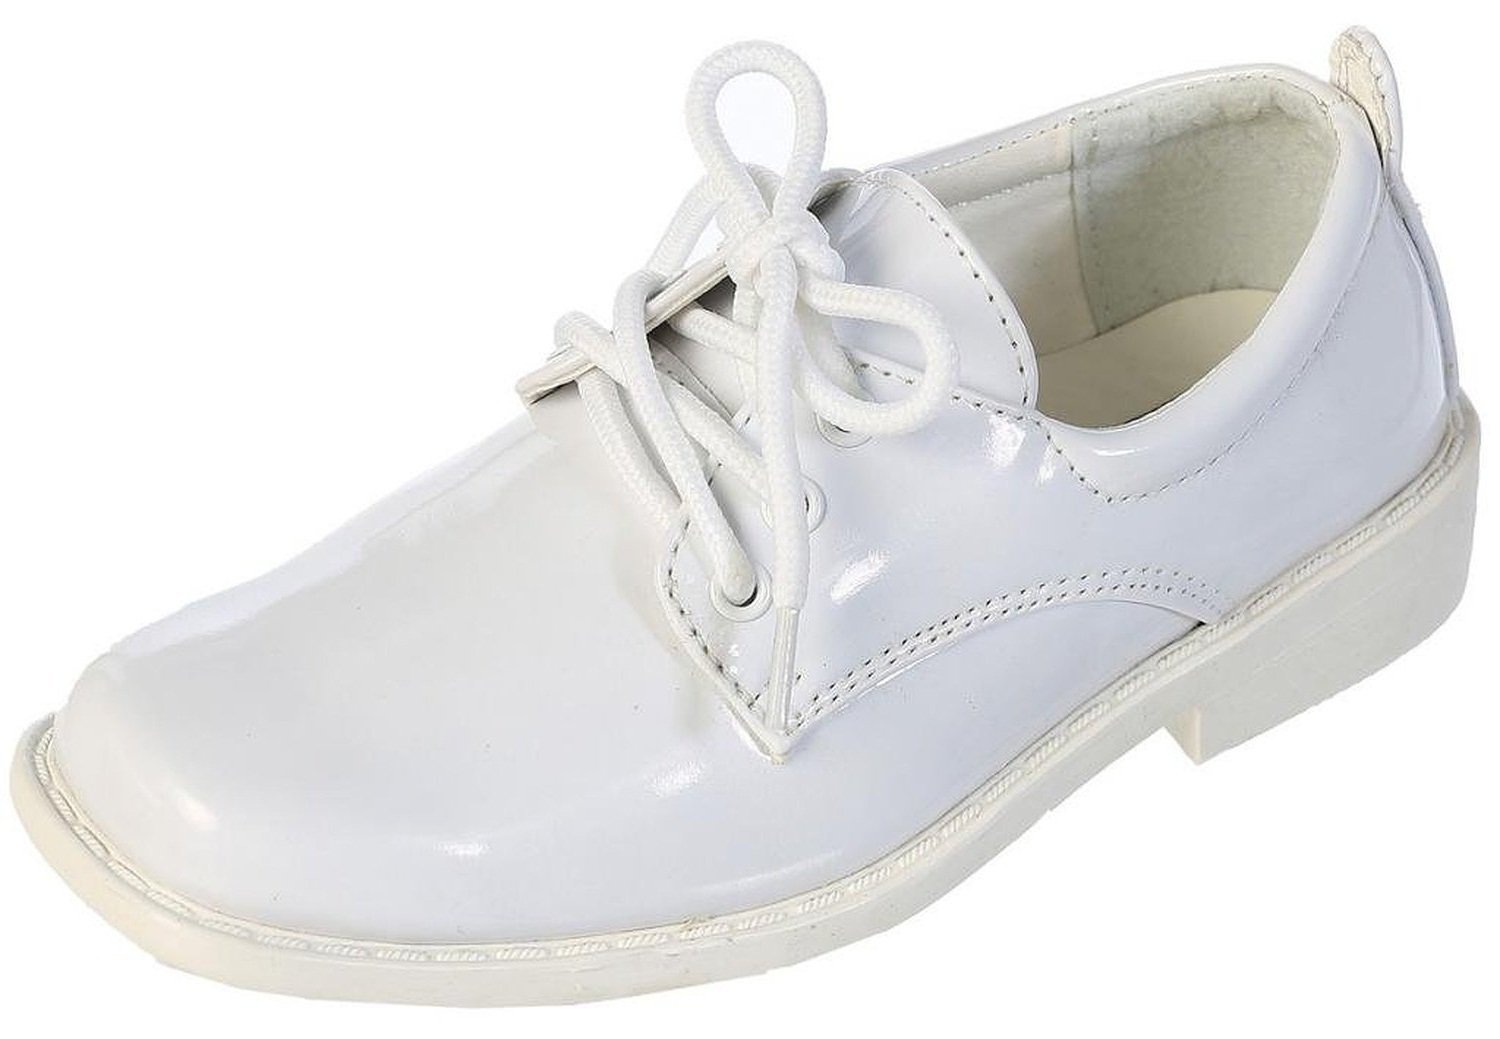 Boys Square Toe Lace Up Oxford Patent Dress Shoes - Available in White 13 Little Kid